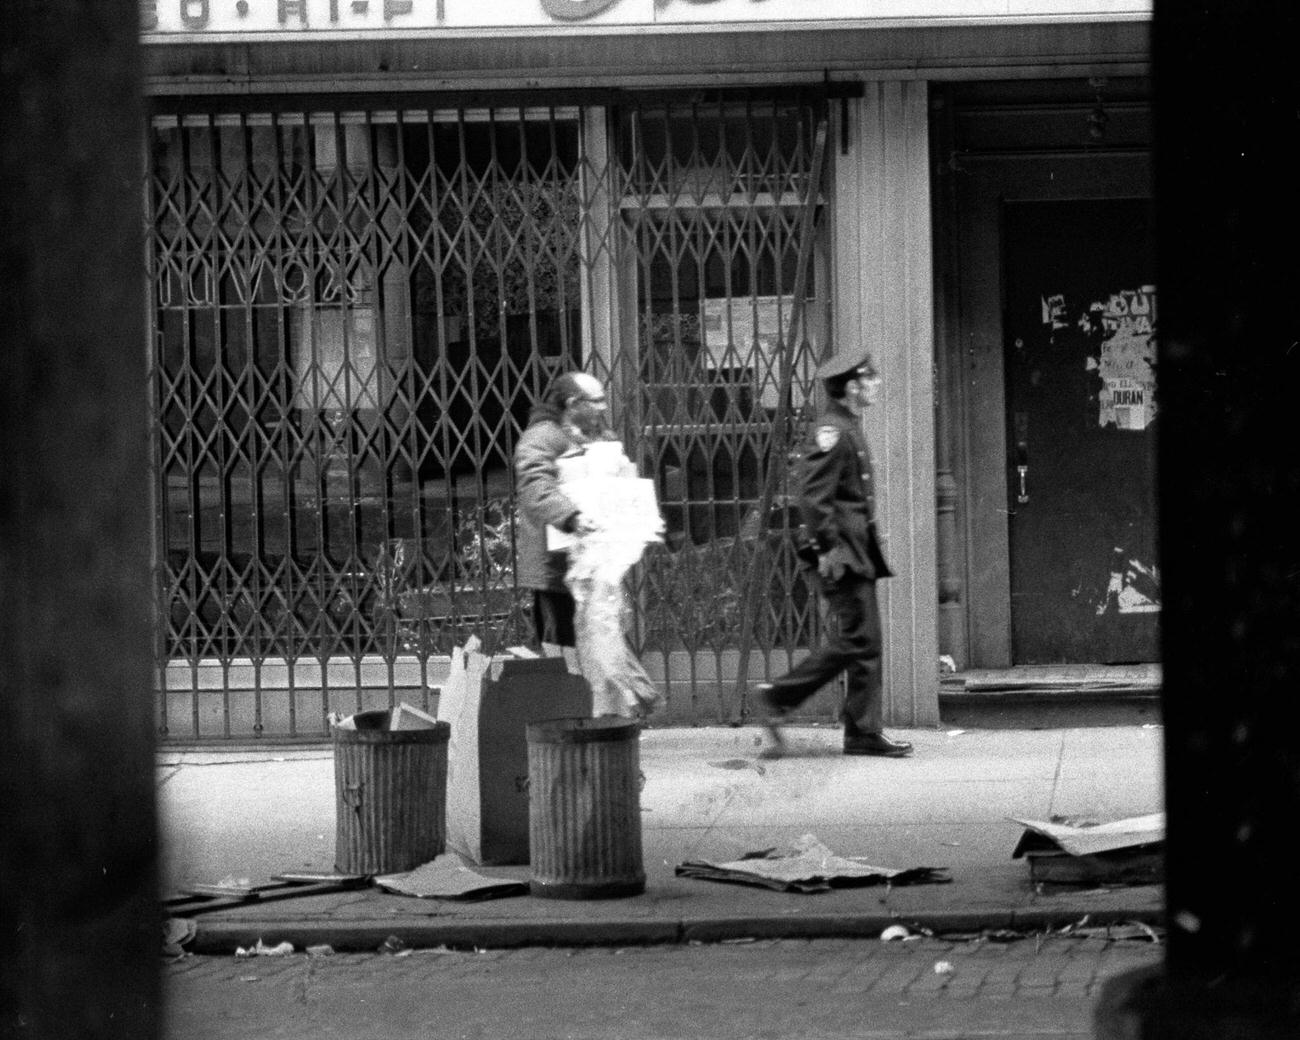 Man From Neighboring Store Convoyed To Safety, 1973